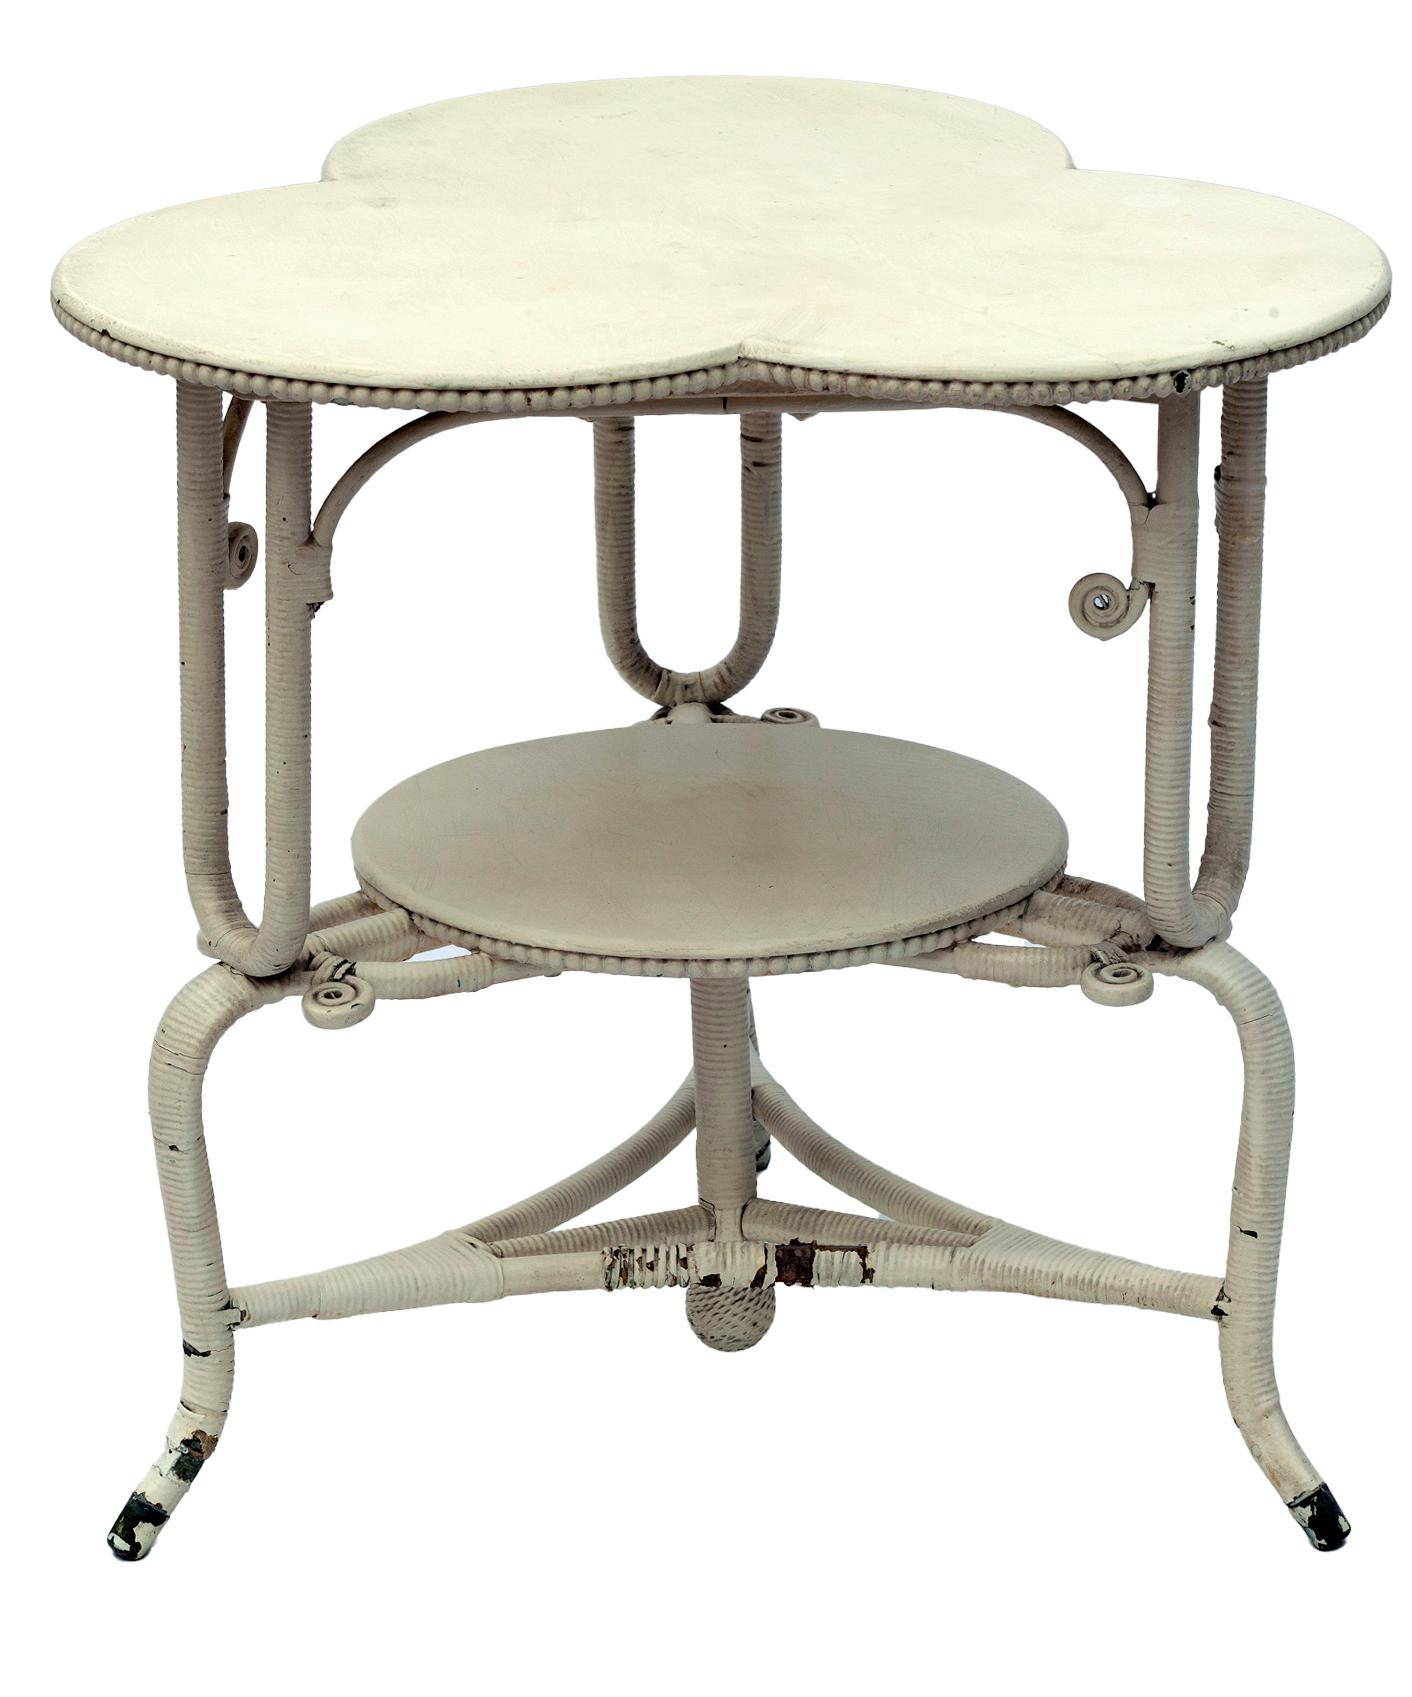 19th century antique two-tiered cloverleaf table with wicker wrapped legs. The table rests on 3 legs.
Old enamel paint., beaded edge.
